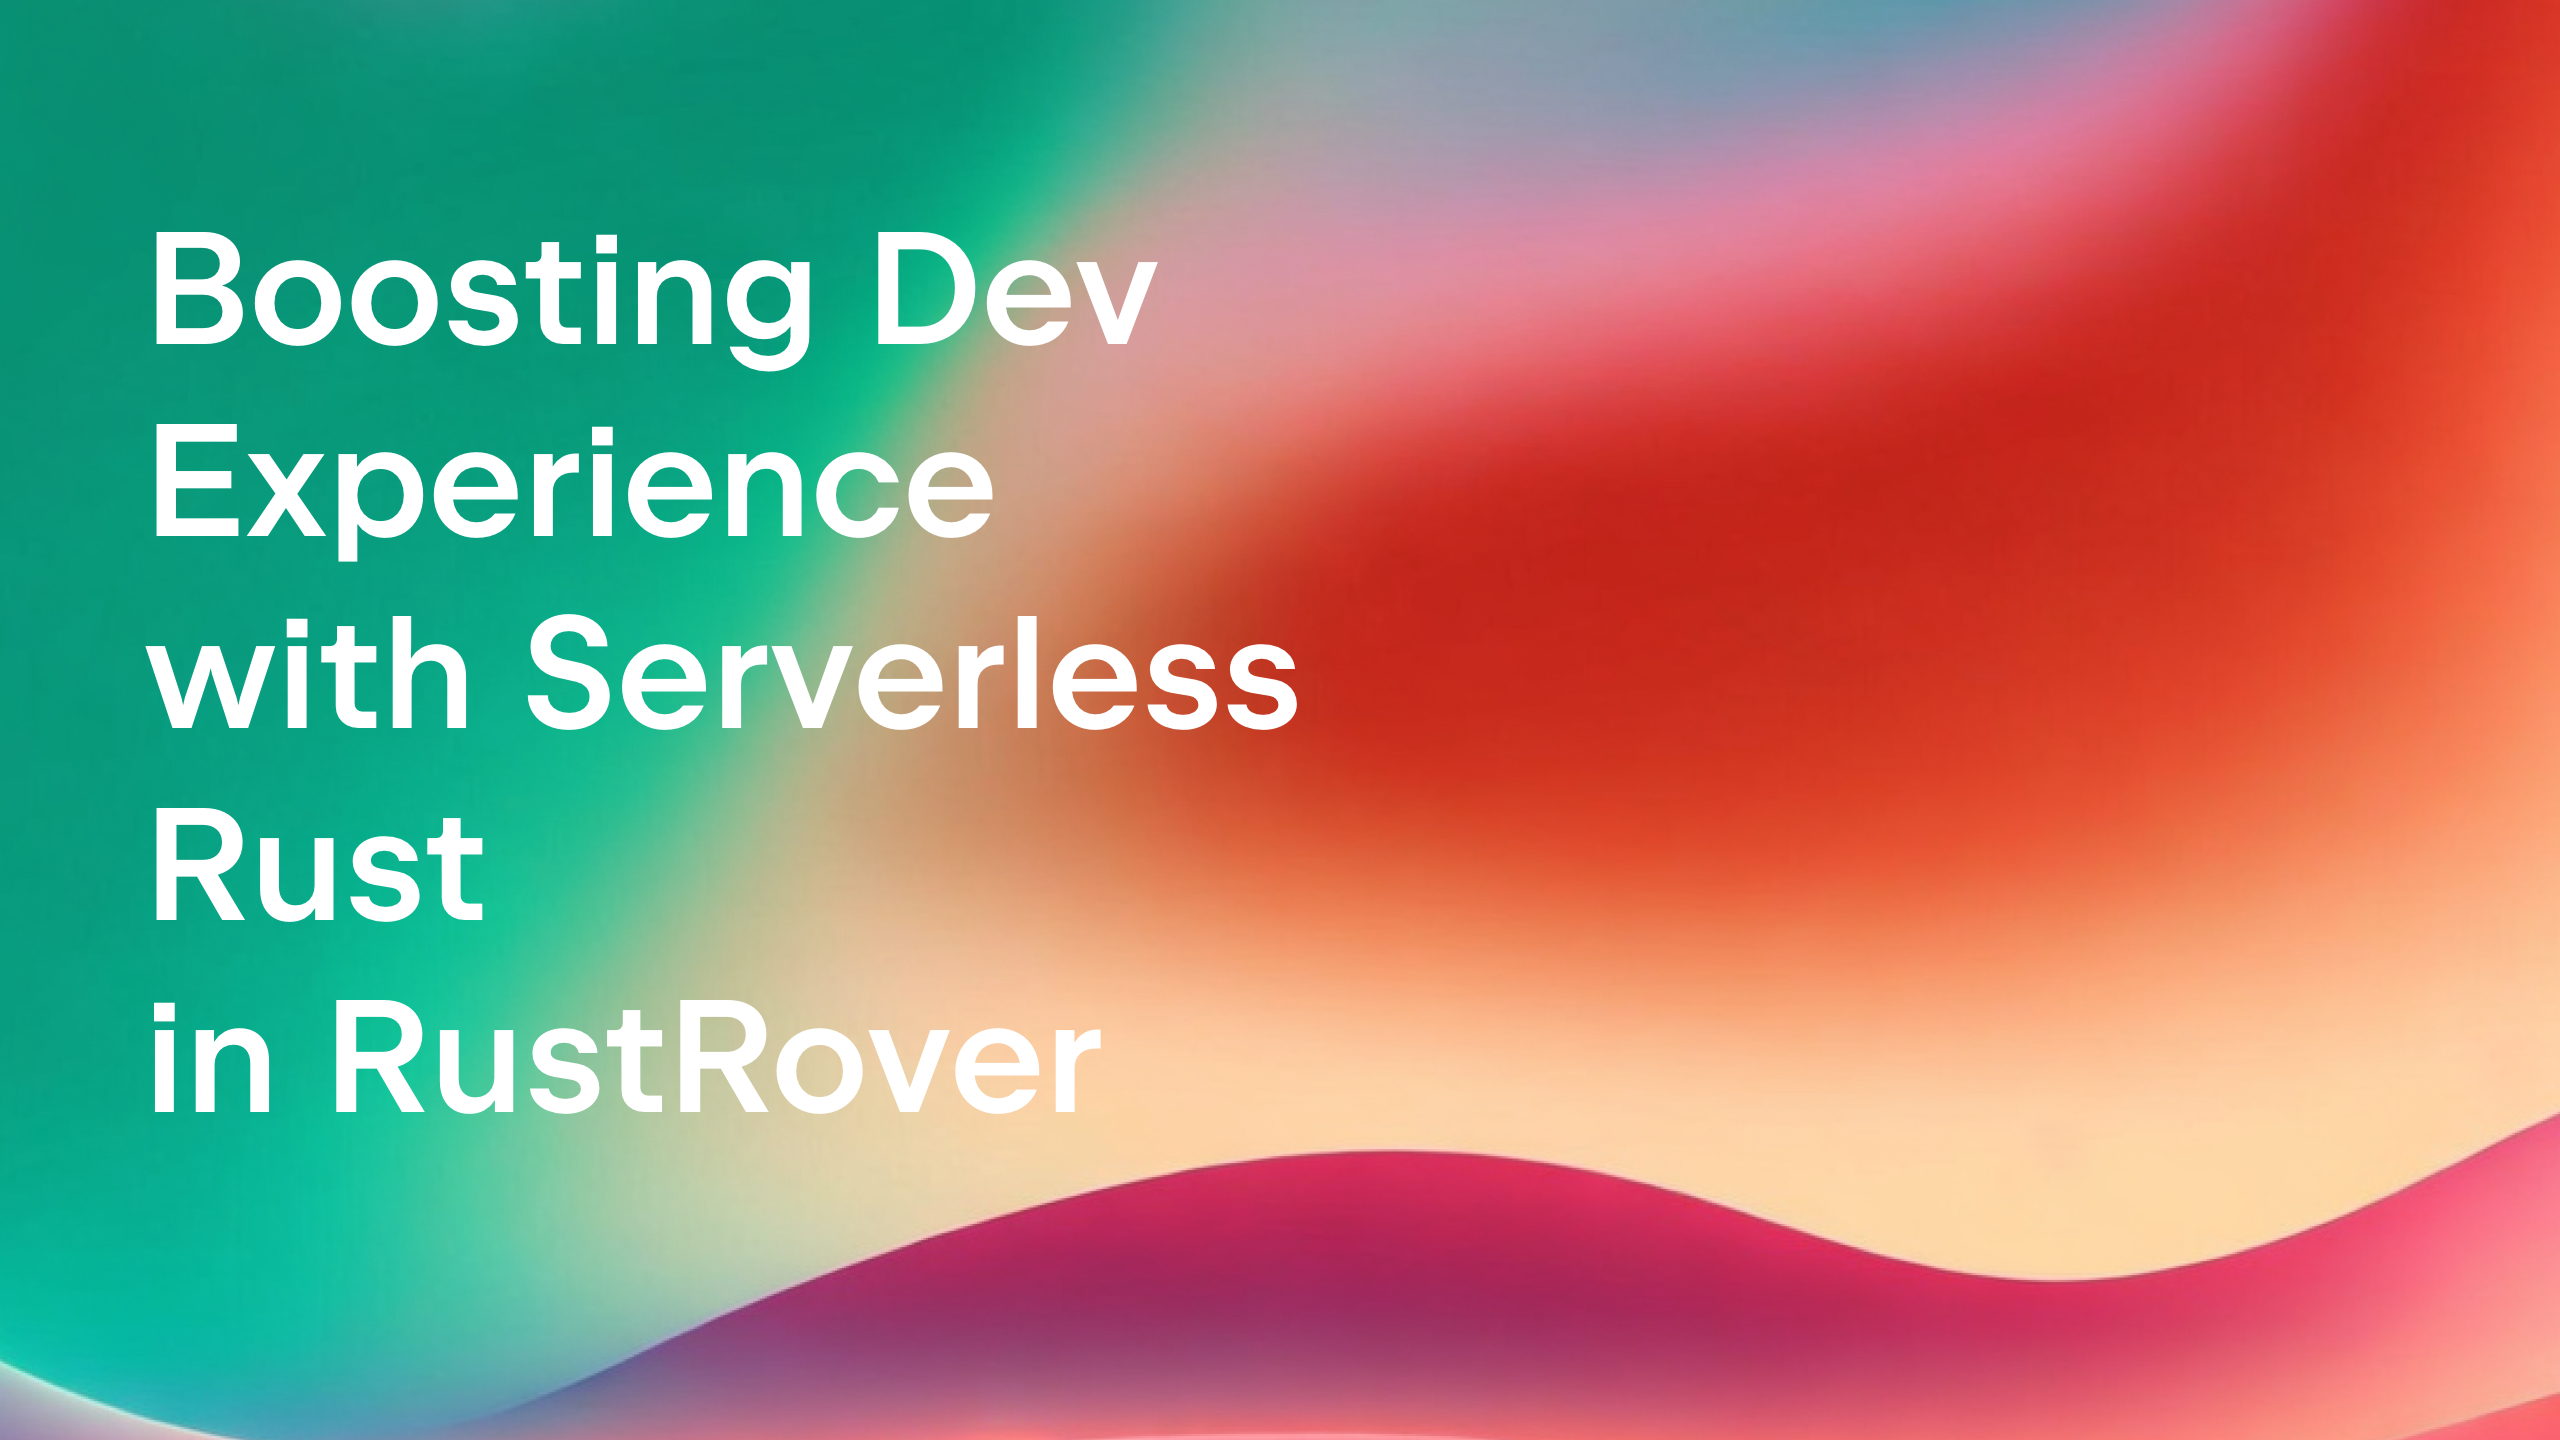 Boosting Dev Experience with Serverless Rust in RustRover